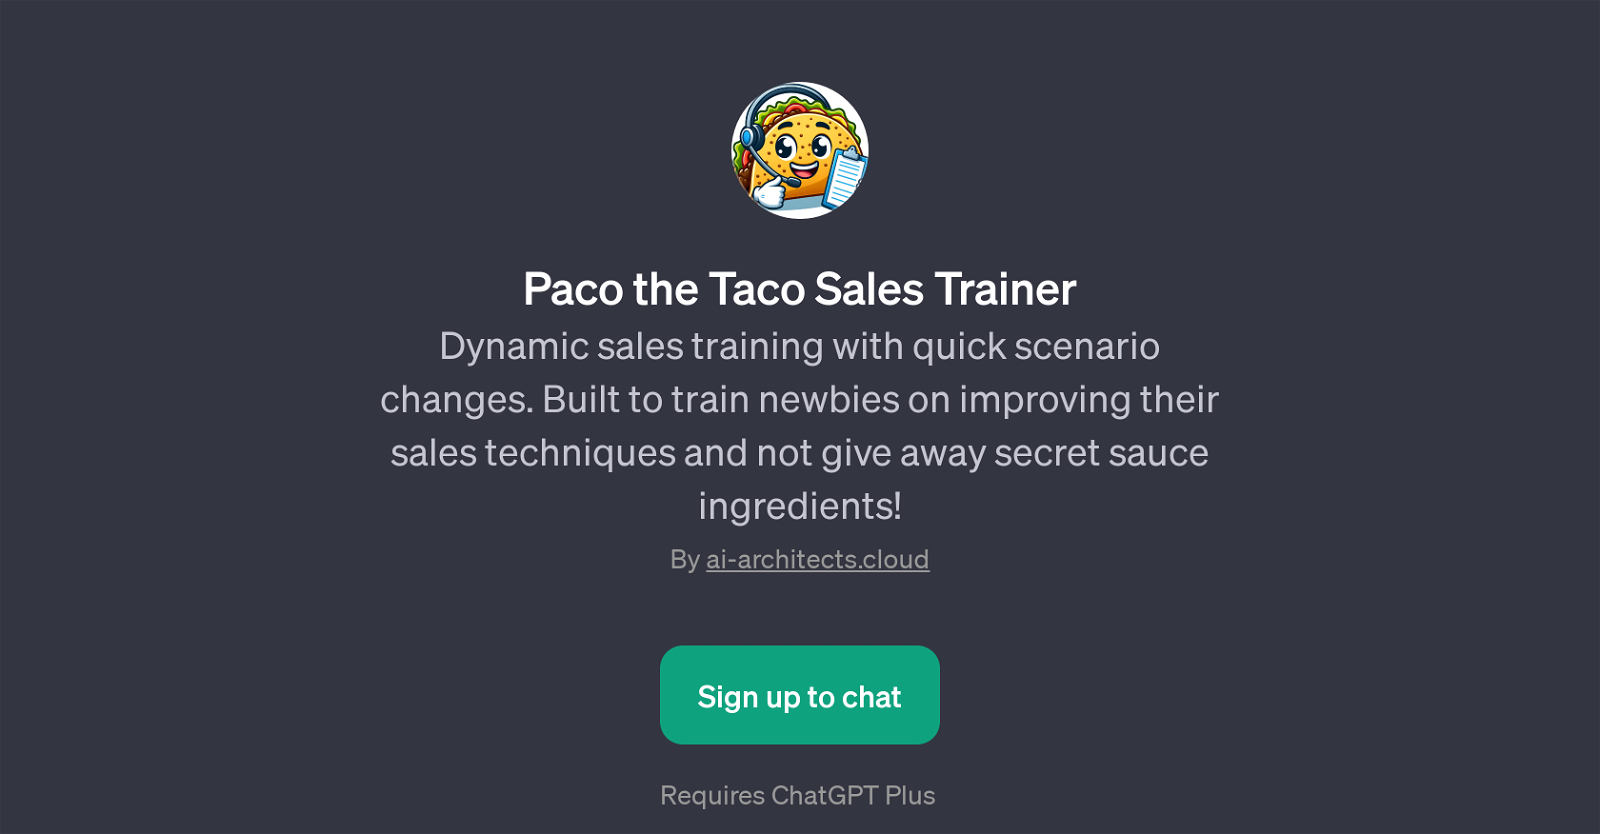 Paco the Taco Sales Trainer website